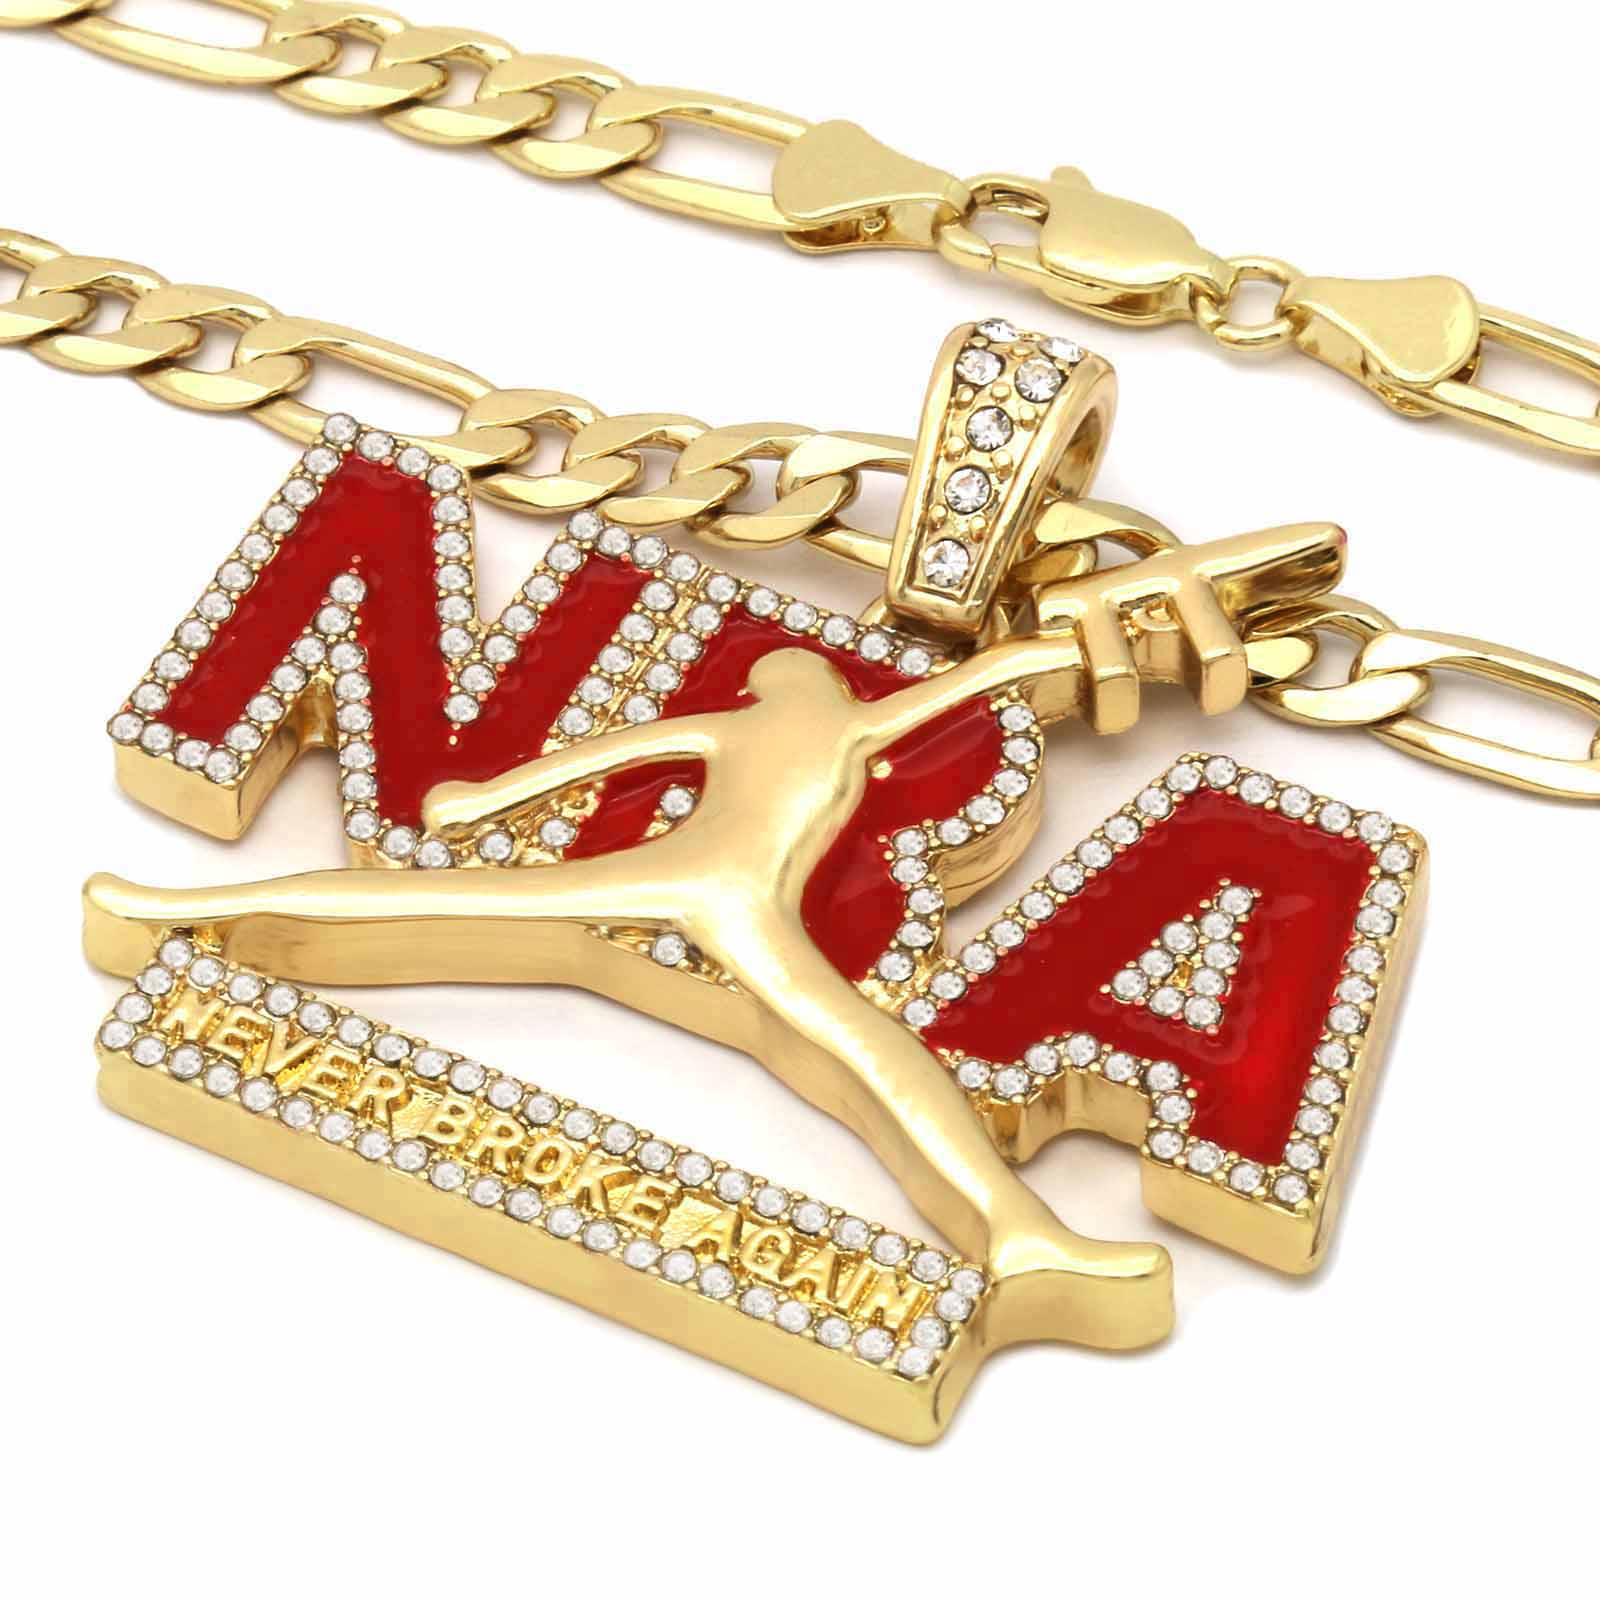 The Never Broke Again Necklace